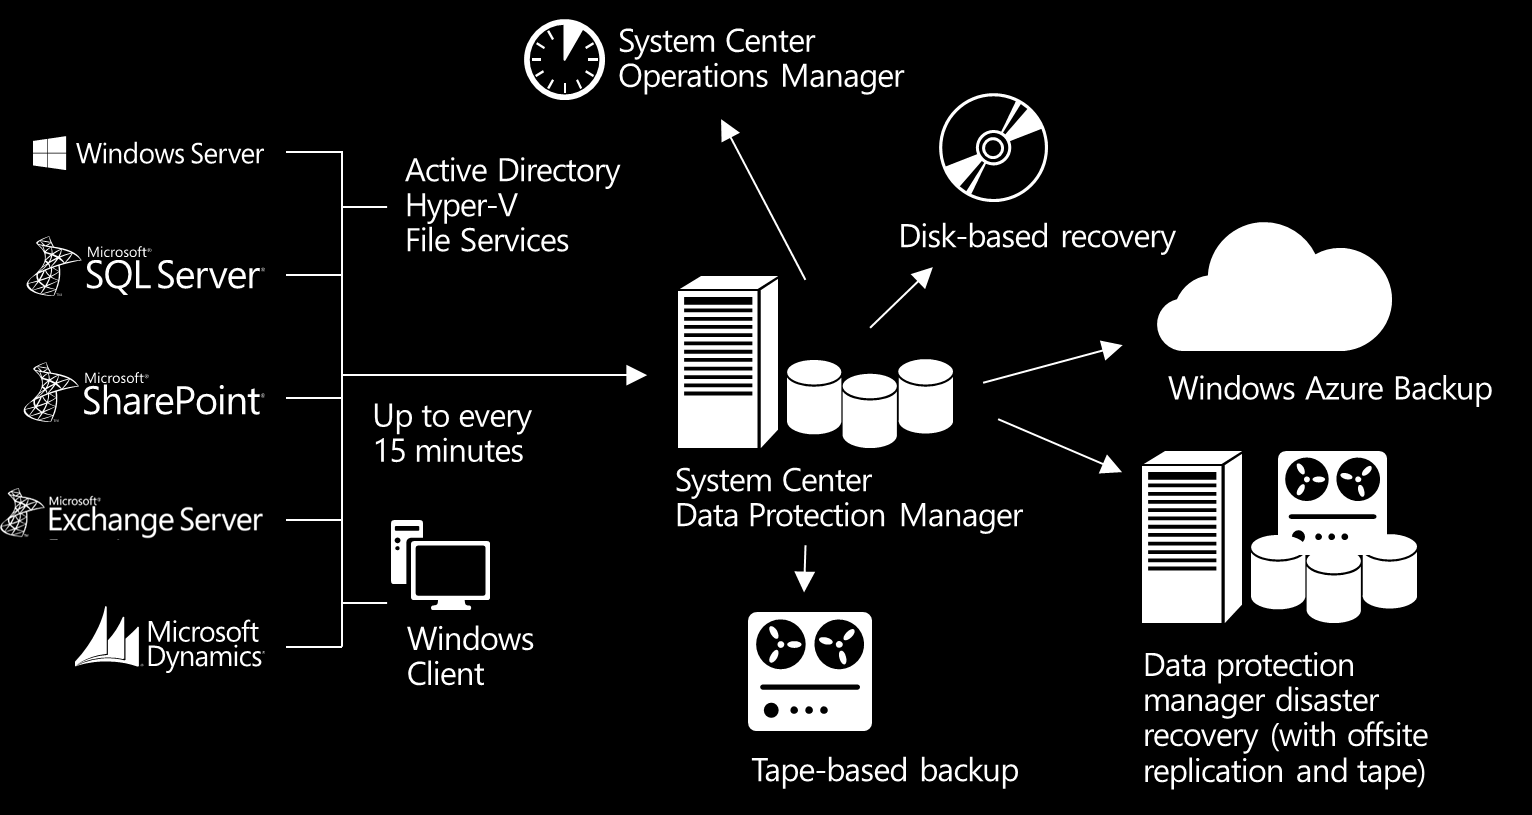 Data Protection Manager Centralized protection for key VMs and applications Workloads DPM protects key workloads, at a granular application level, up to every 15 minutes Disk/Tape/Azure DPM supports